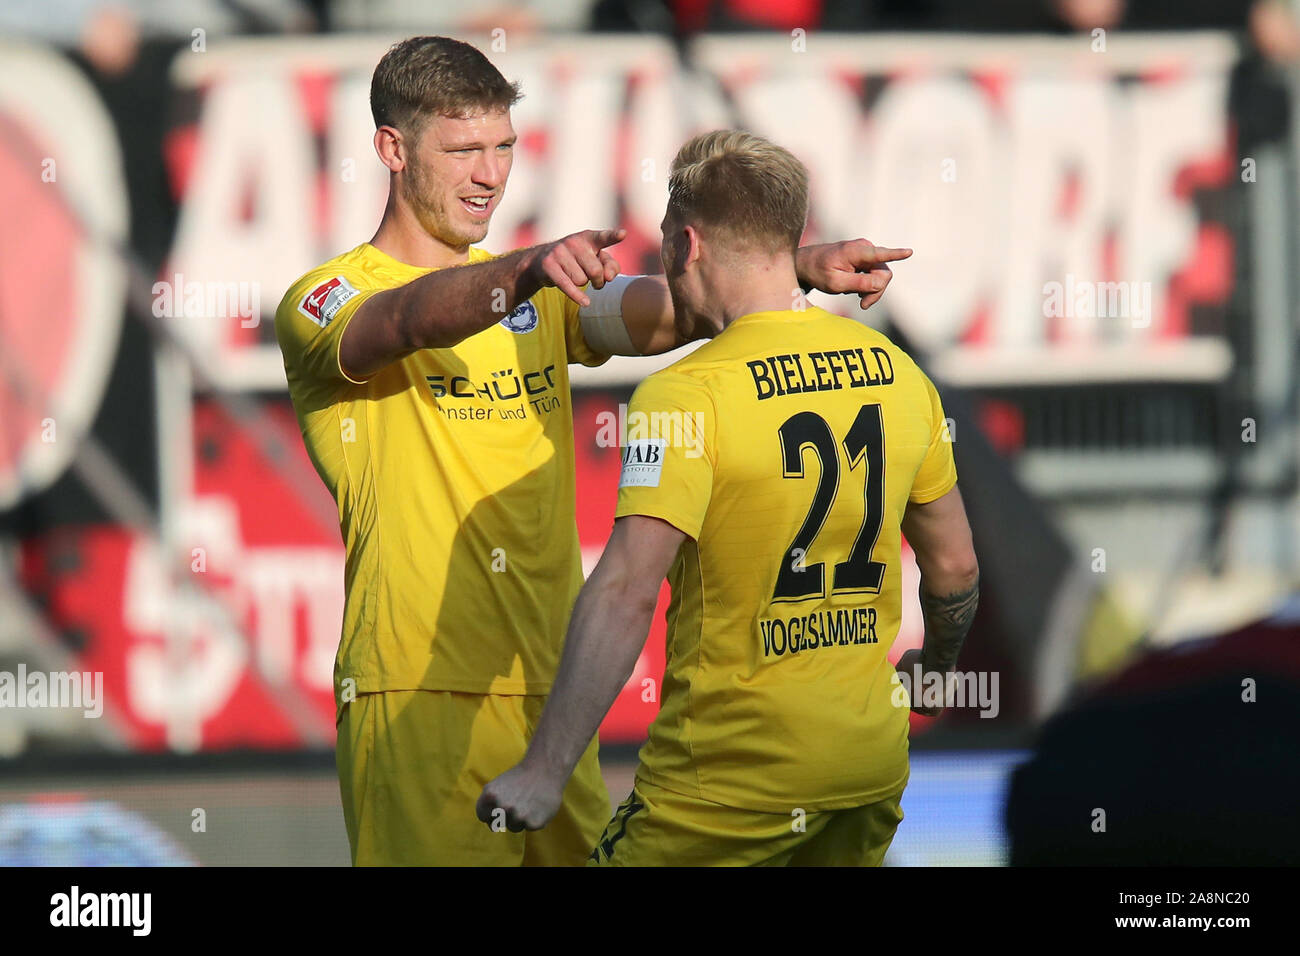 10 November 2019, Bavaria, Nuremberg: Soccer: 2nd Bundesliga, 1st FC Nuremberg - Arminia Bielefeld, 13th matchday in Max Morlock Stadium. The Bielefelder Fabian Klos (l) cheers with his colleague Andreas Voglsammer about his goal to 1:4. Photo: Daniel Karmann/dpa - IMPORTANT NOTE: In accordance with the requirements of the DFL Deutsche Fußball Liga or the DFB Deutscher Fußball-Bund, it is prohibited to use or have used photographs taken in the stadium and/or the match in the form of sequence images and/or video-like photo sequences. Stock Photo